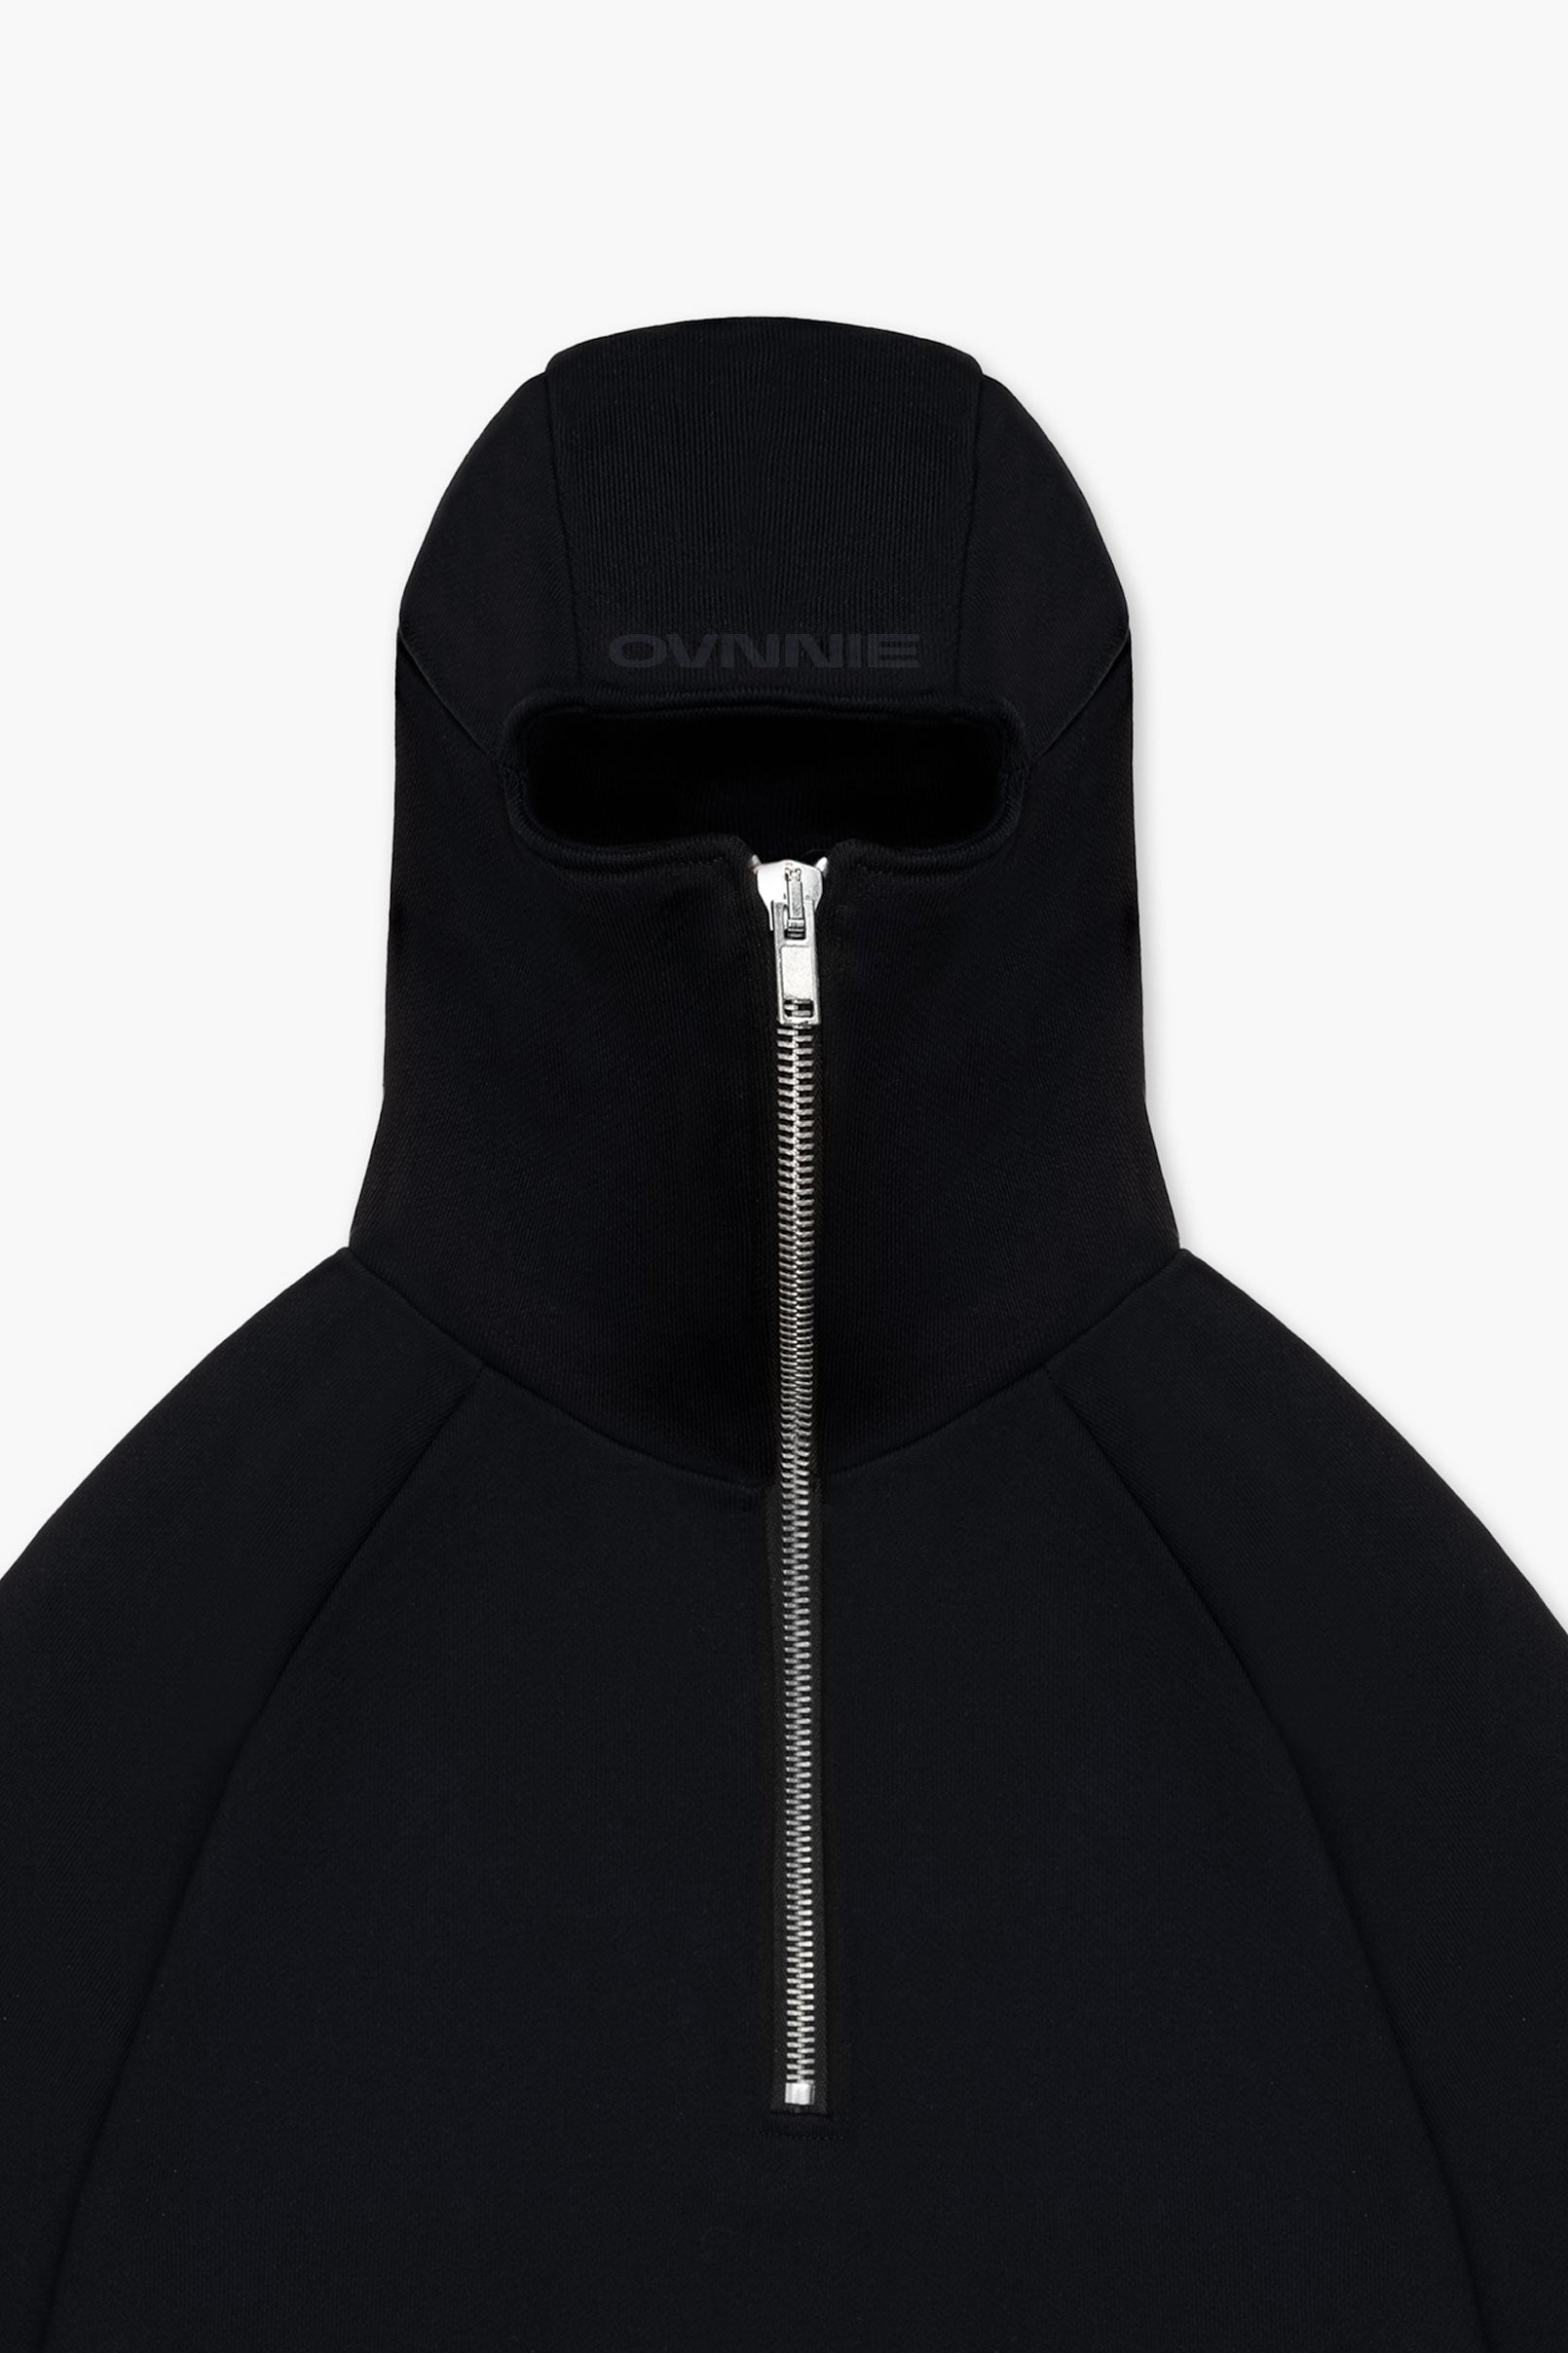 Front hood of balaclava hoodie zipped all the way up